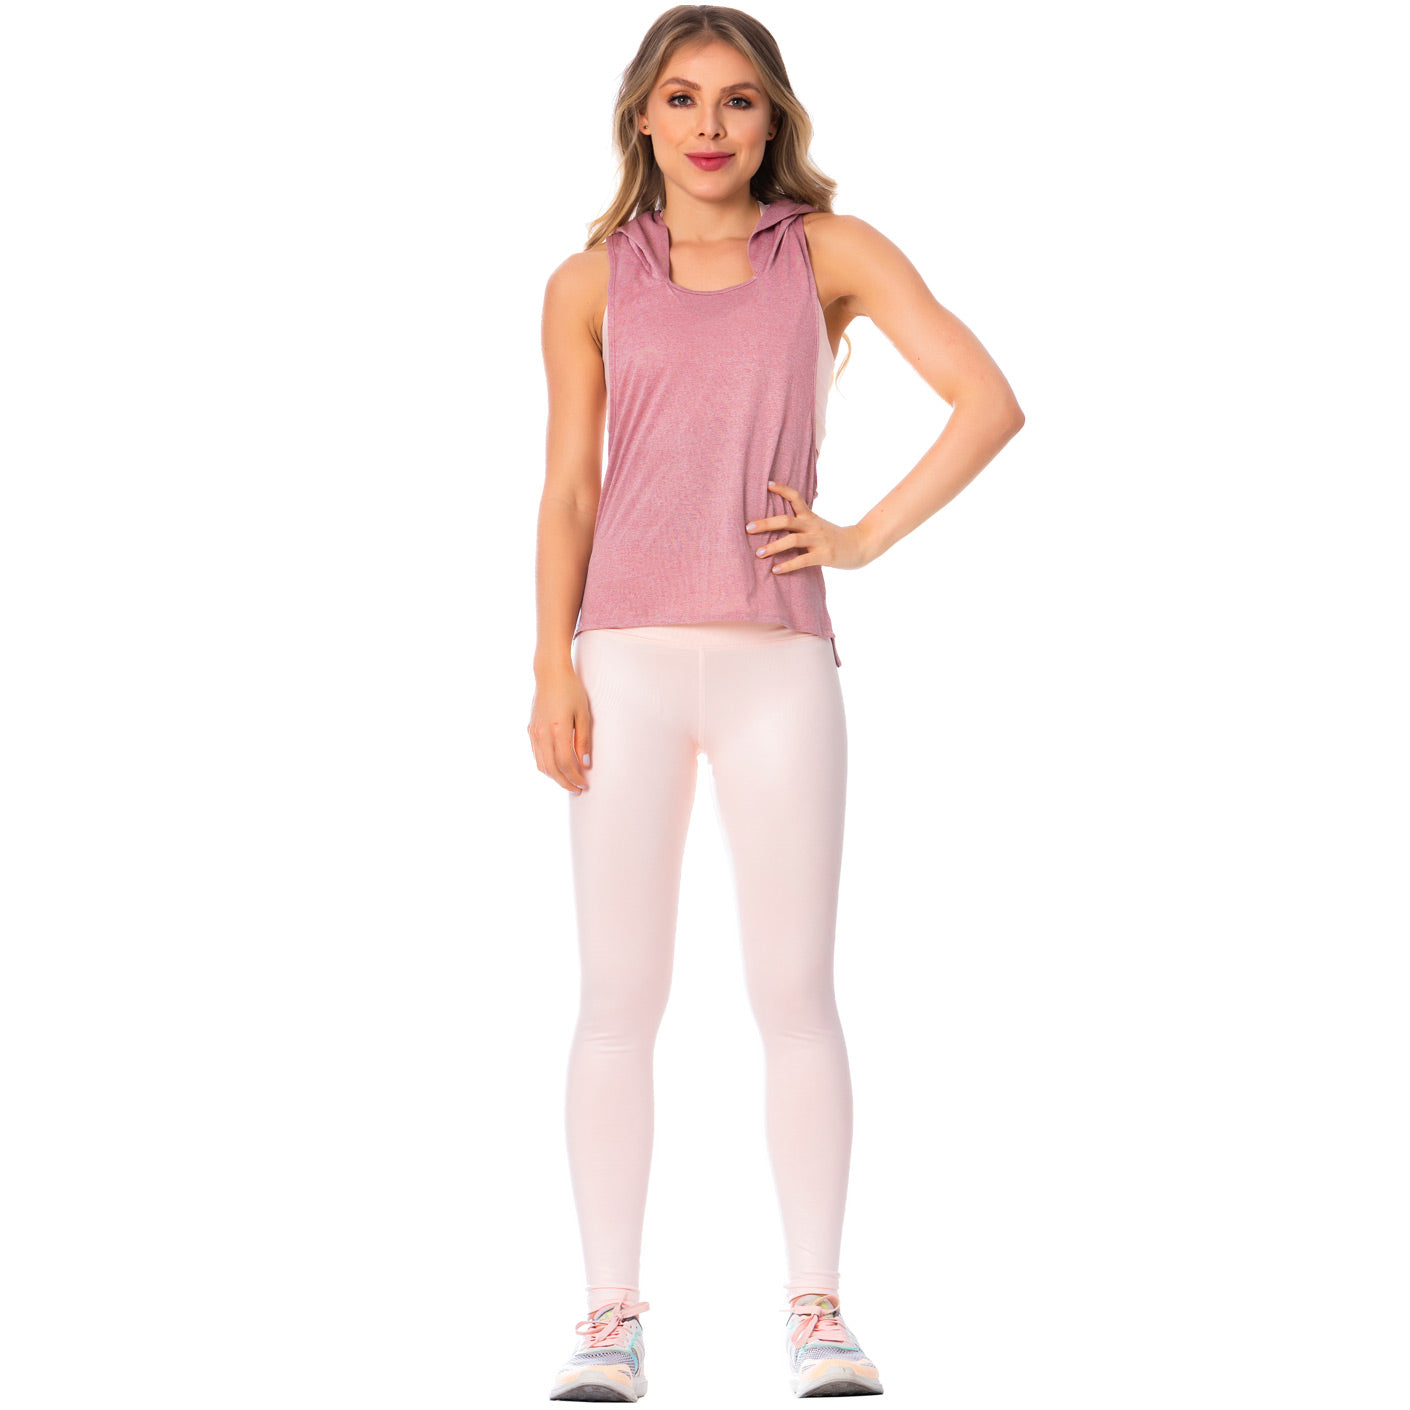 Pink Sleeveless Hooded Tank Top for Women - Flexmee US